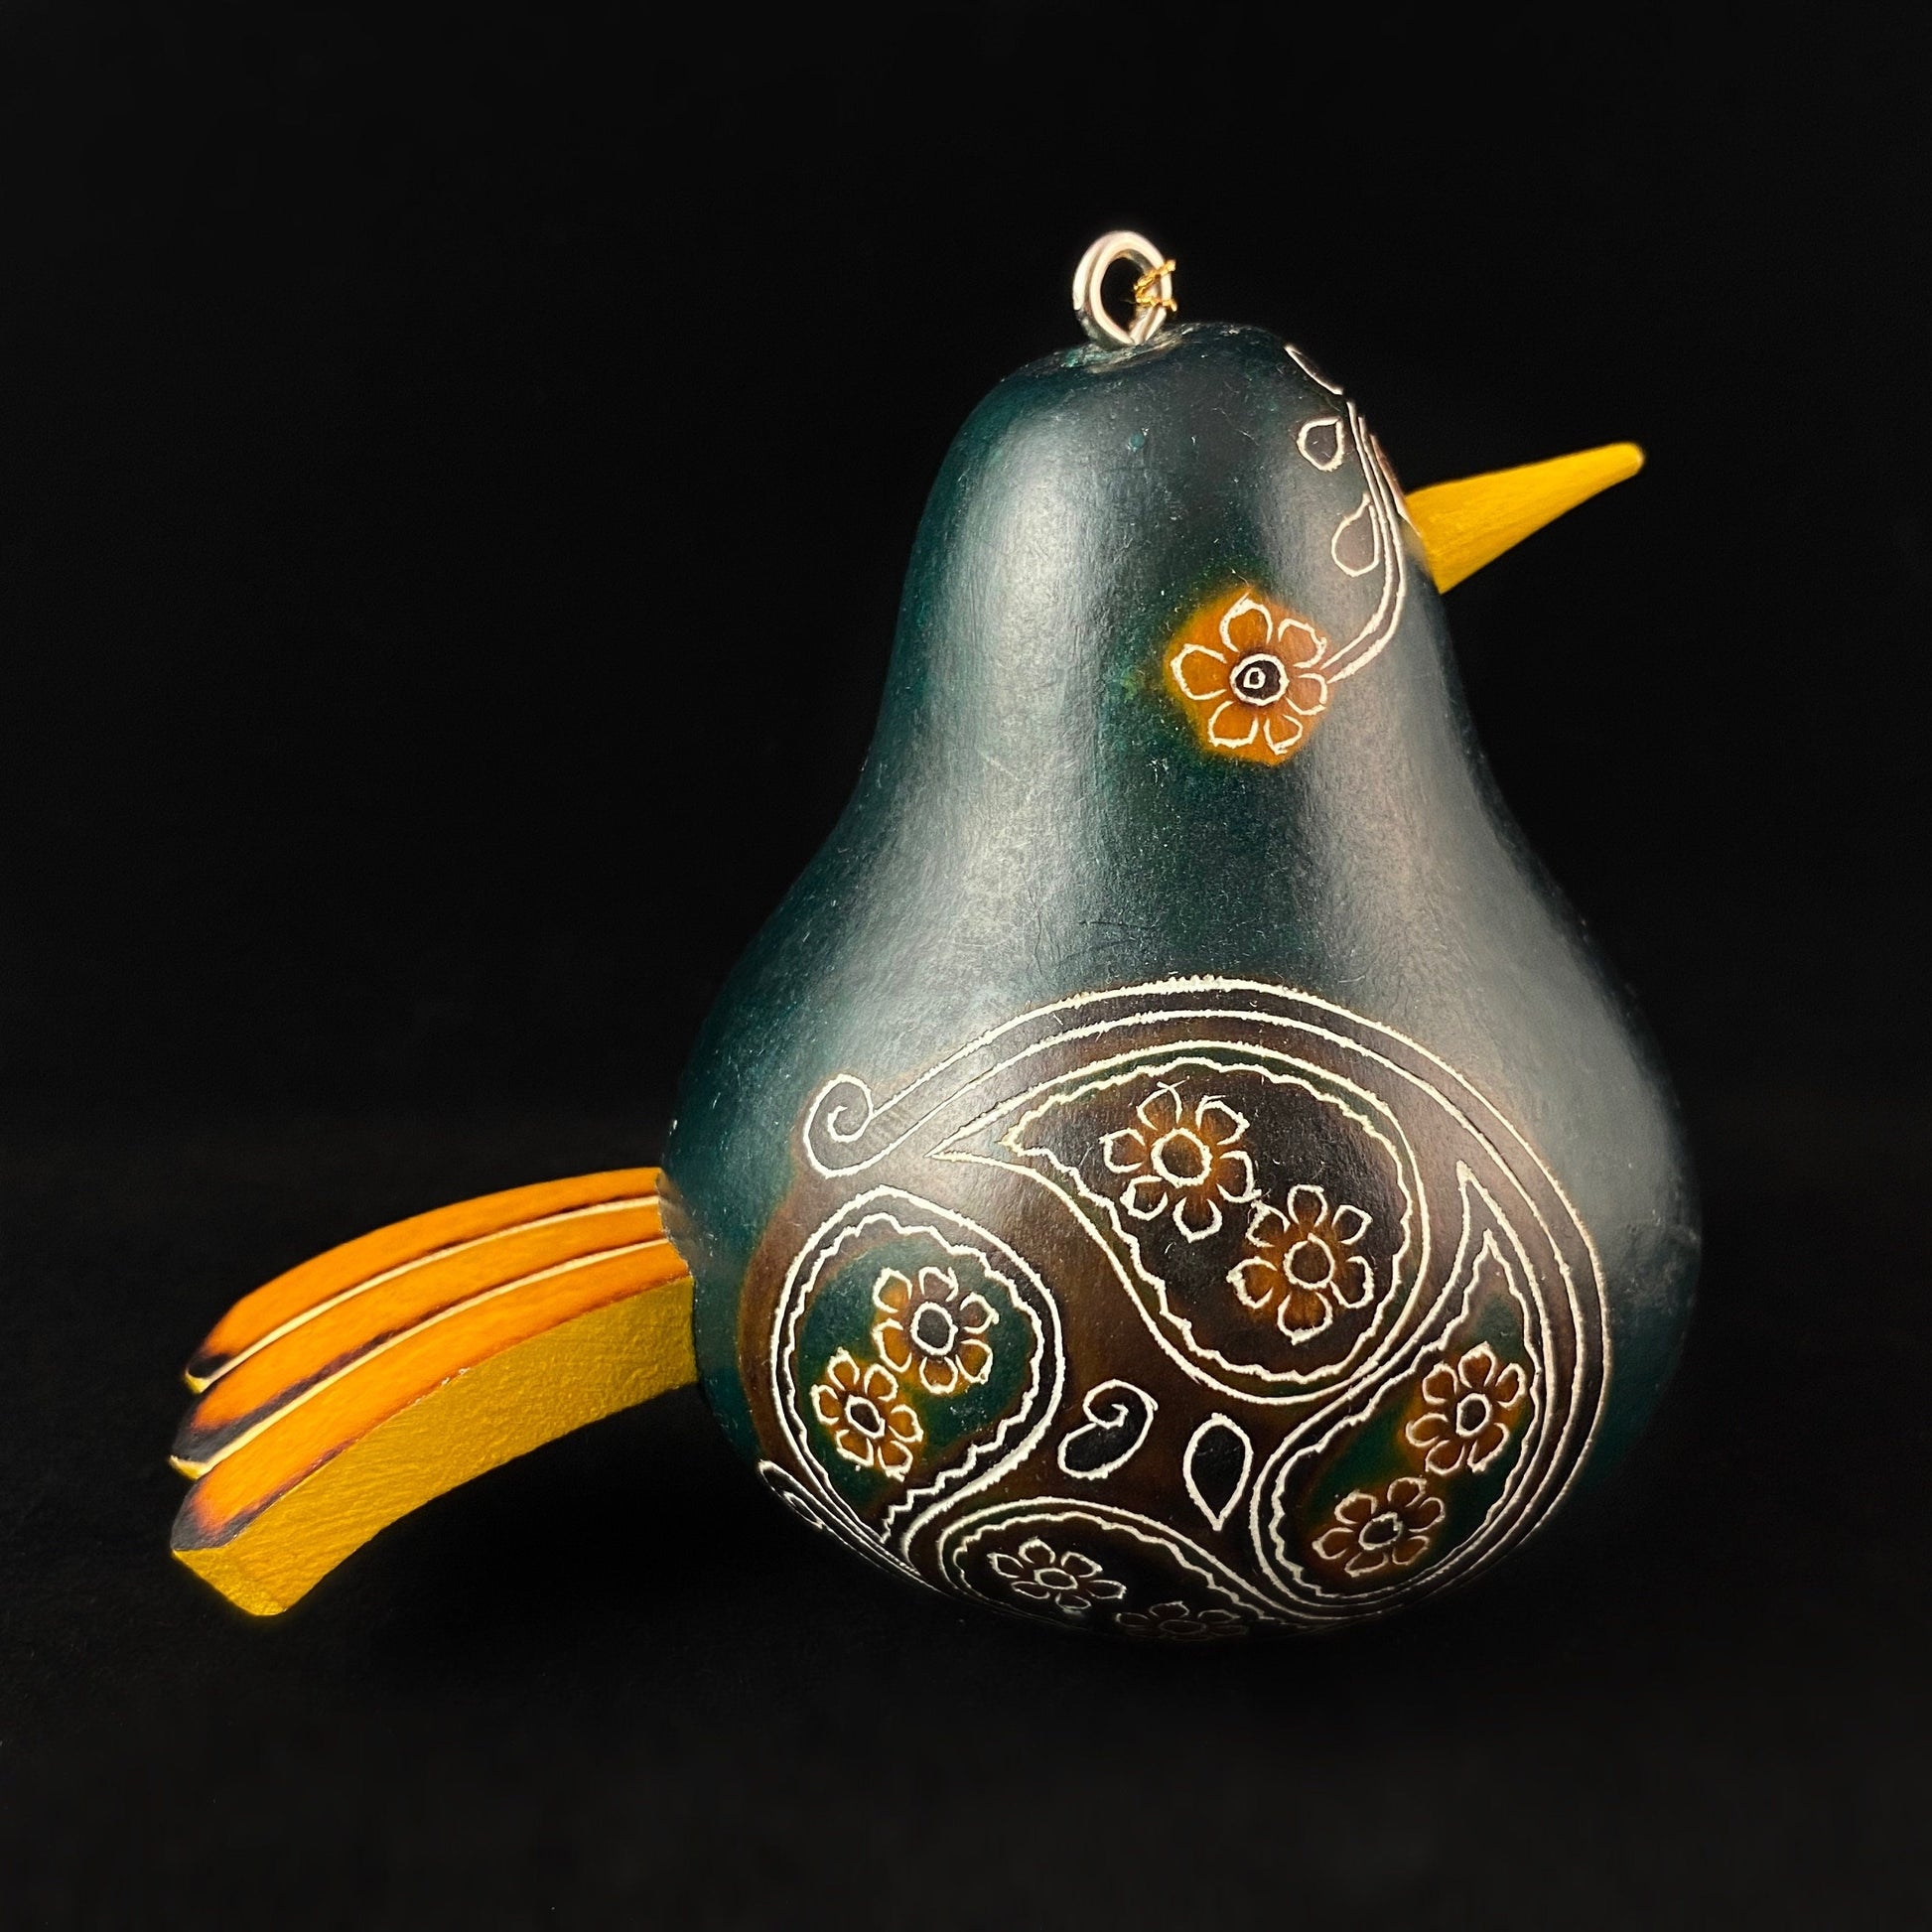 Decorative Green Bird Ornament/Maraca - Hand-Carved and Hand Painted Peruvian Gourd